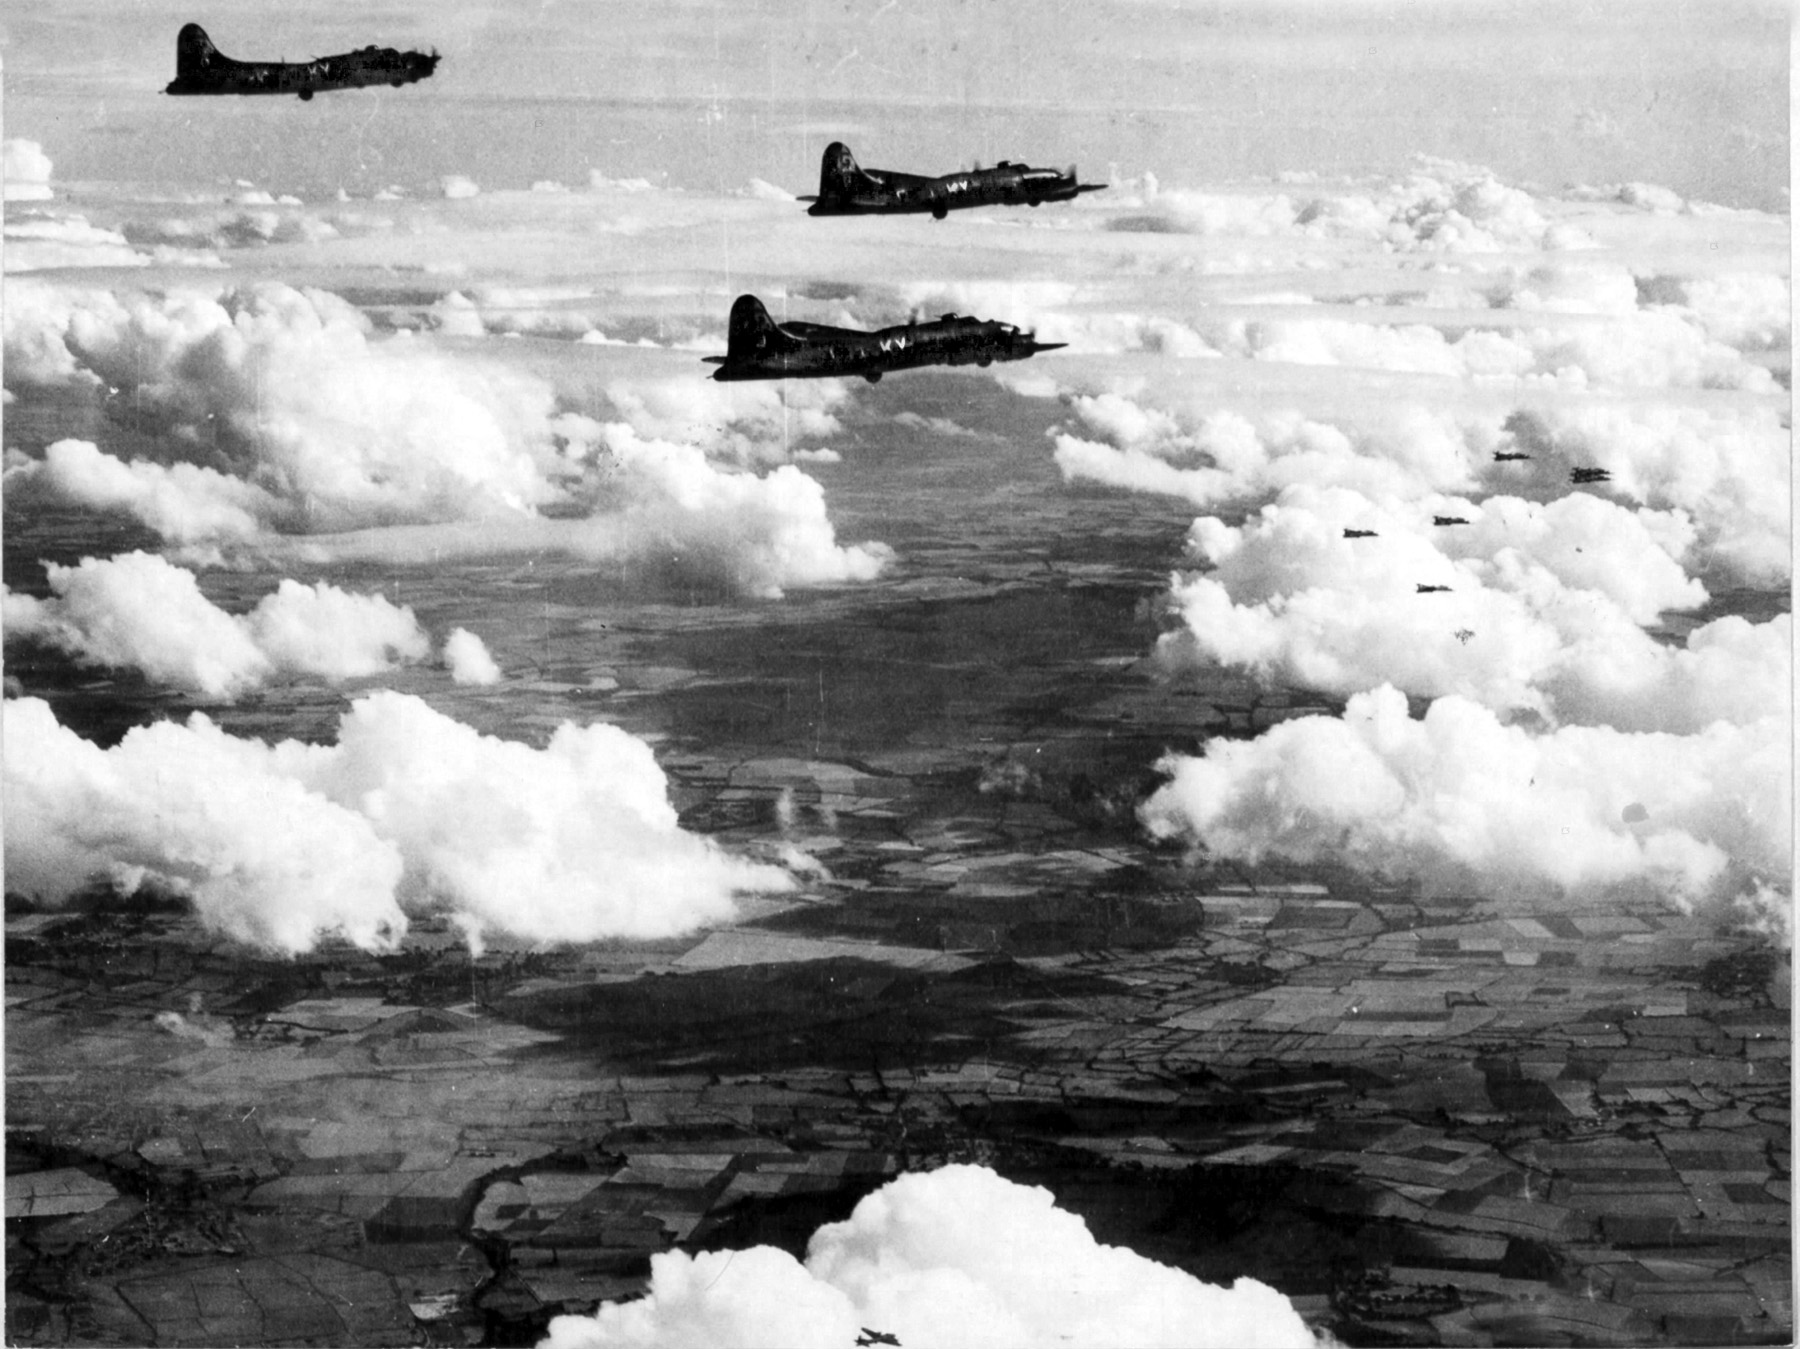 B-17 Flying Fortress heavy bombers of the 350th Bomb Group are shown in flight during an August 1943 mission to bomb German airdromes near Paris. The B-17s were escorted in this mission by Republic P-47 Thunderbolt fighters that tried to keep the Luftwaffe at bay. 